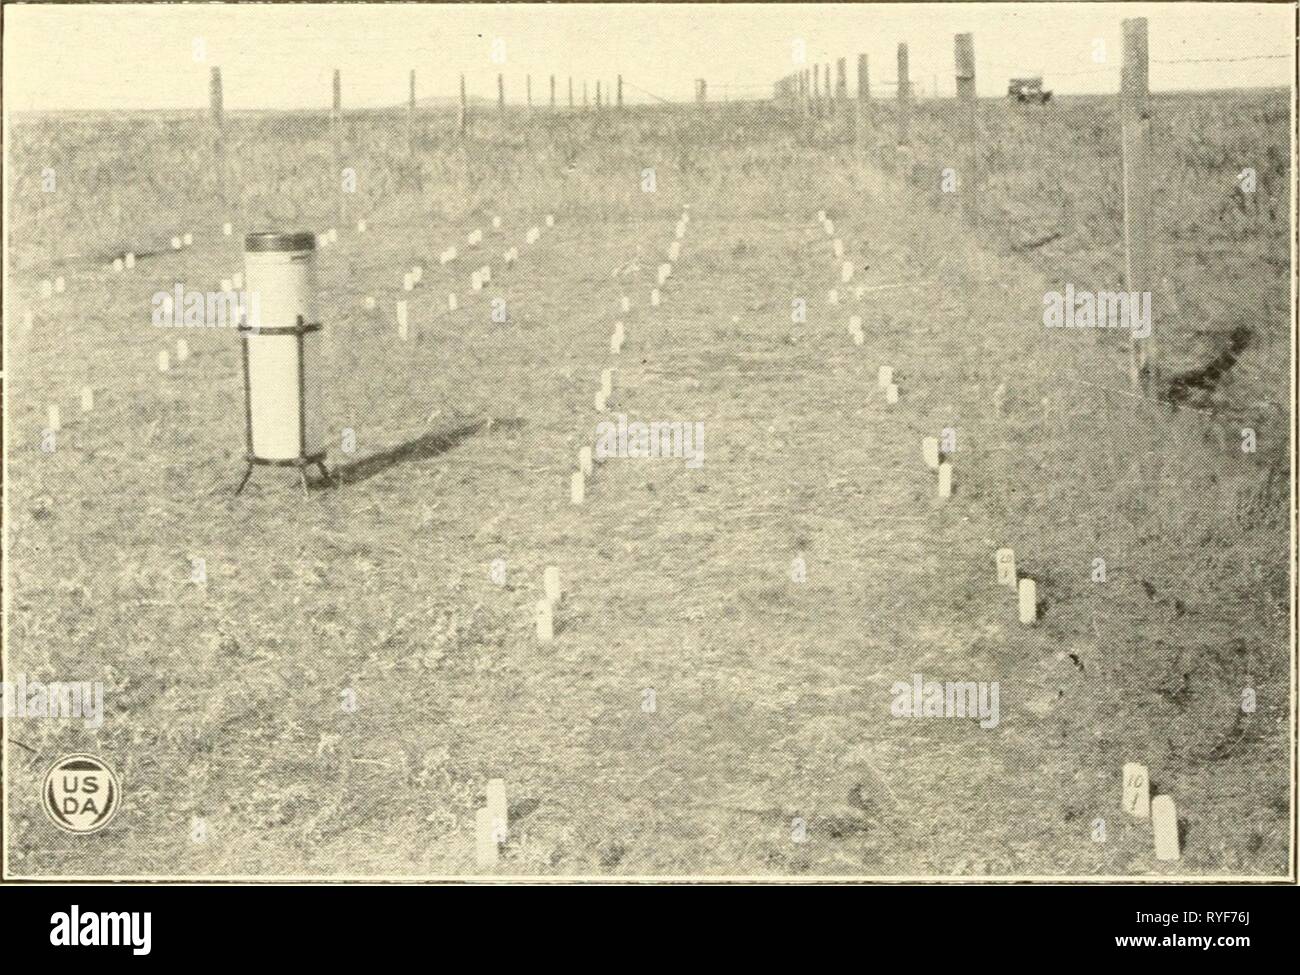 Effects of different systems and intensities of grazing upon the native vegetation at the Northern Great Plains Field Station  effectsofdiffere1170sarv Year: 1923  Fig. I.—Close View of a Single Plant of Artemisia frigida in the 30-Acre Pasture. Tin plani was in inches tall and had 36 flower stalks. This aff&lt; rds an idea of the size a single planl may attain. June, L920.    Fig. 2.—View of the Clipped Quadrats in the Isolation Transect of THE 100-ACRE PASTURE. The quadrat cut every 10 days is in the foreground. The duplicates are on the left. October, 191«J. Stock Photo